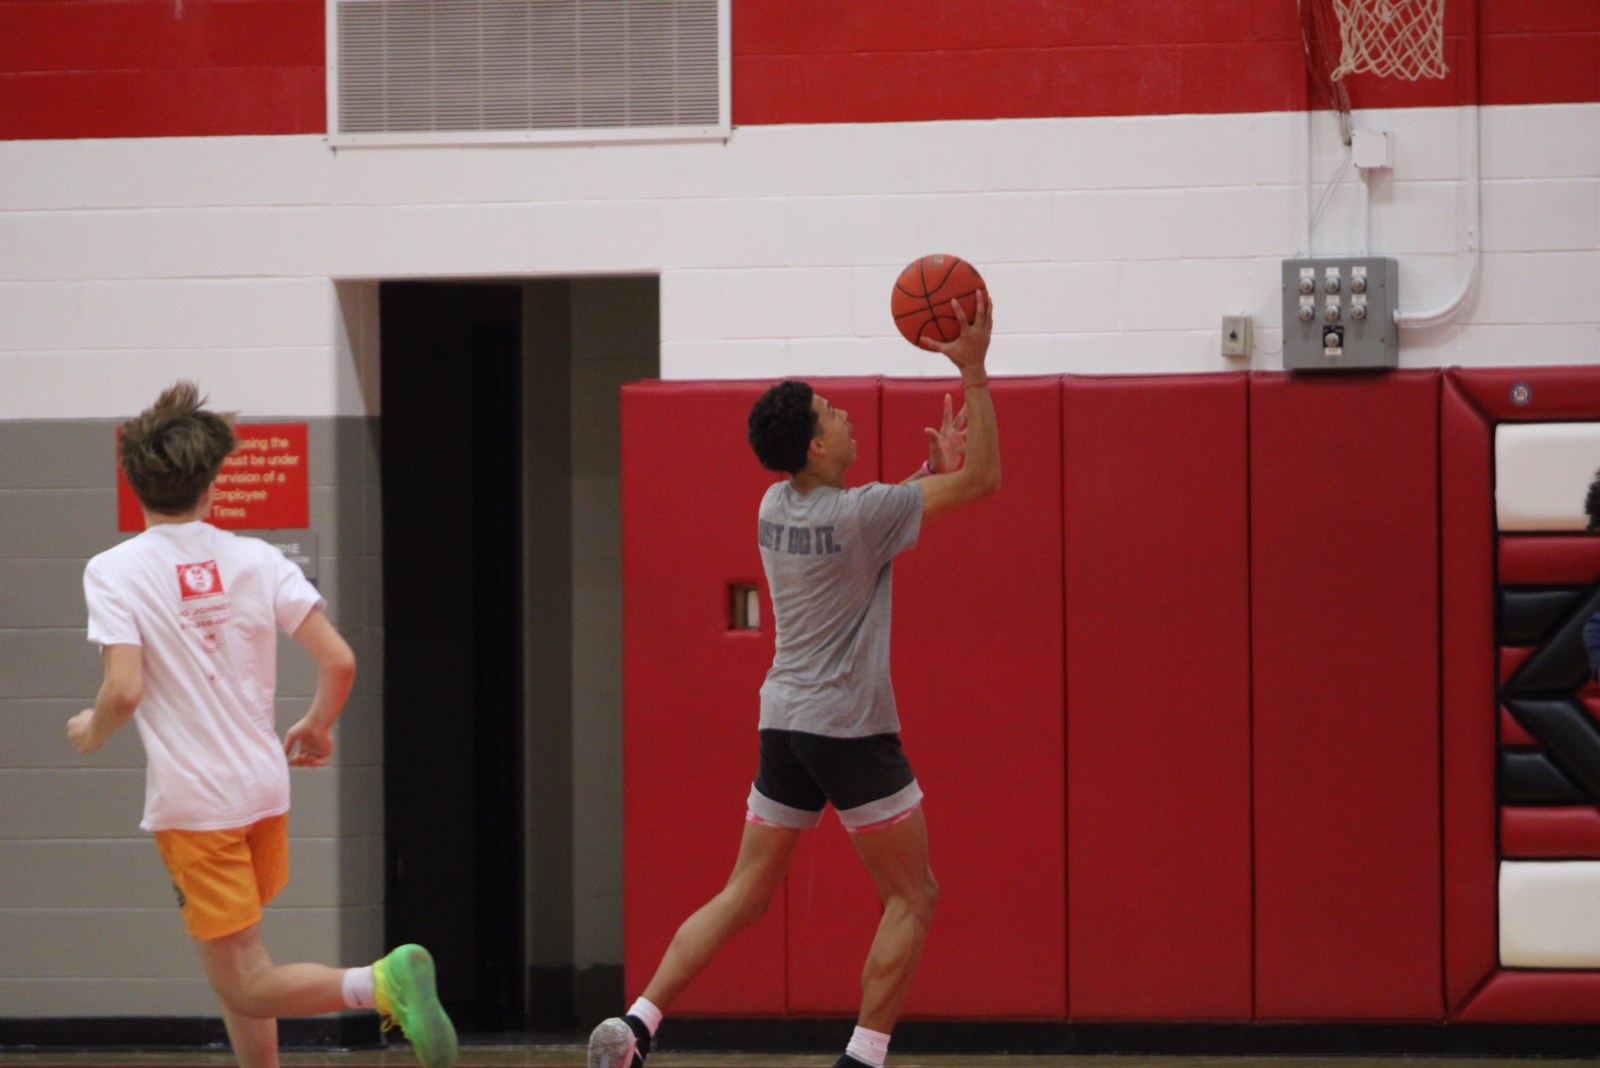 KingSton Swayzer 27 goes up for a layup in a City High Boys Basketball open gym.